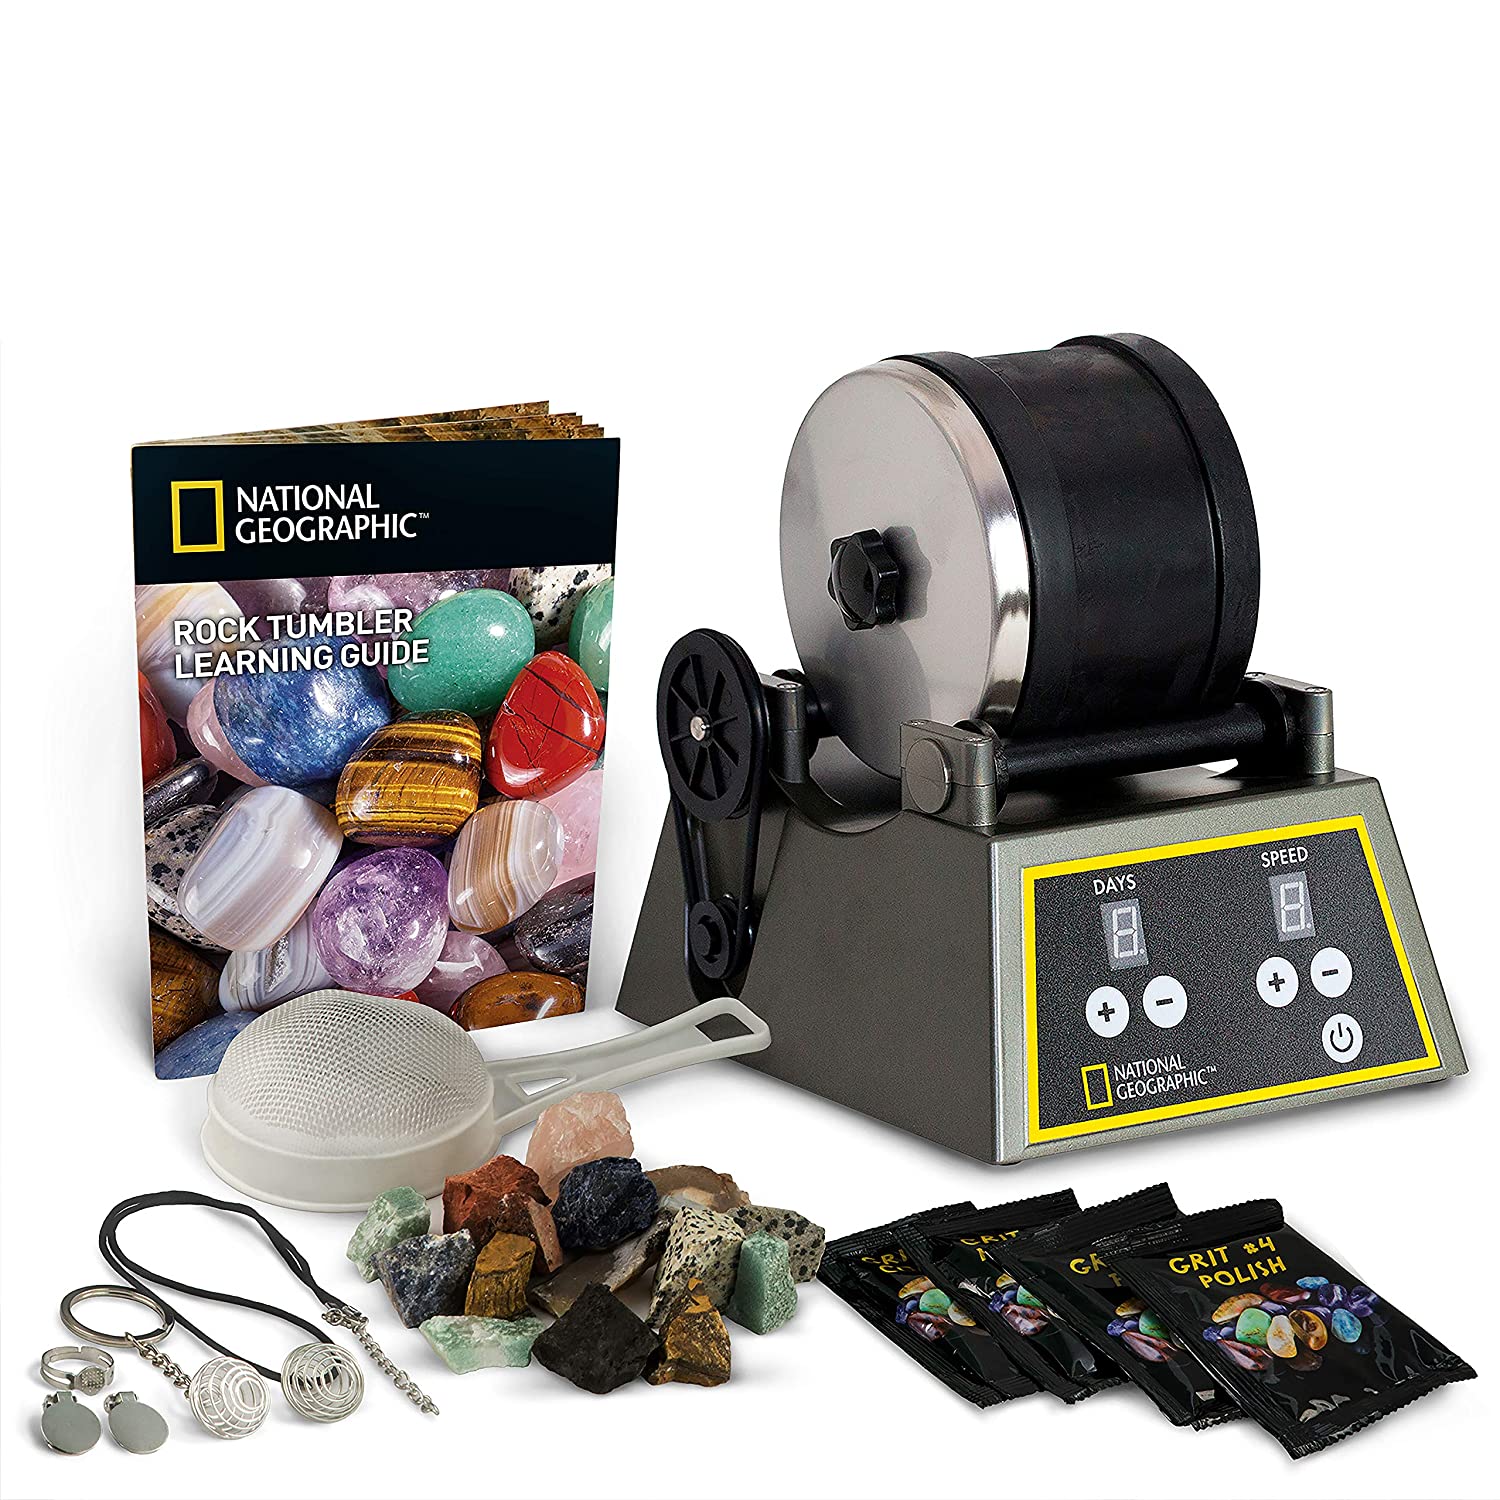 NATIONAL GEOGRAPHIC Professional Rock Tumbler Kit- Advanced features include Shutoff Timer and Speed Control 